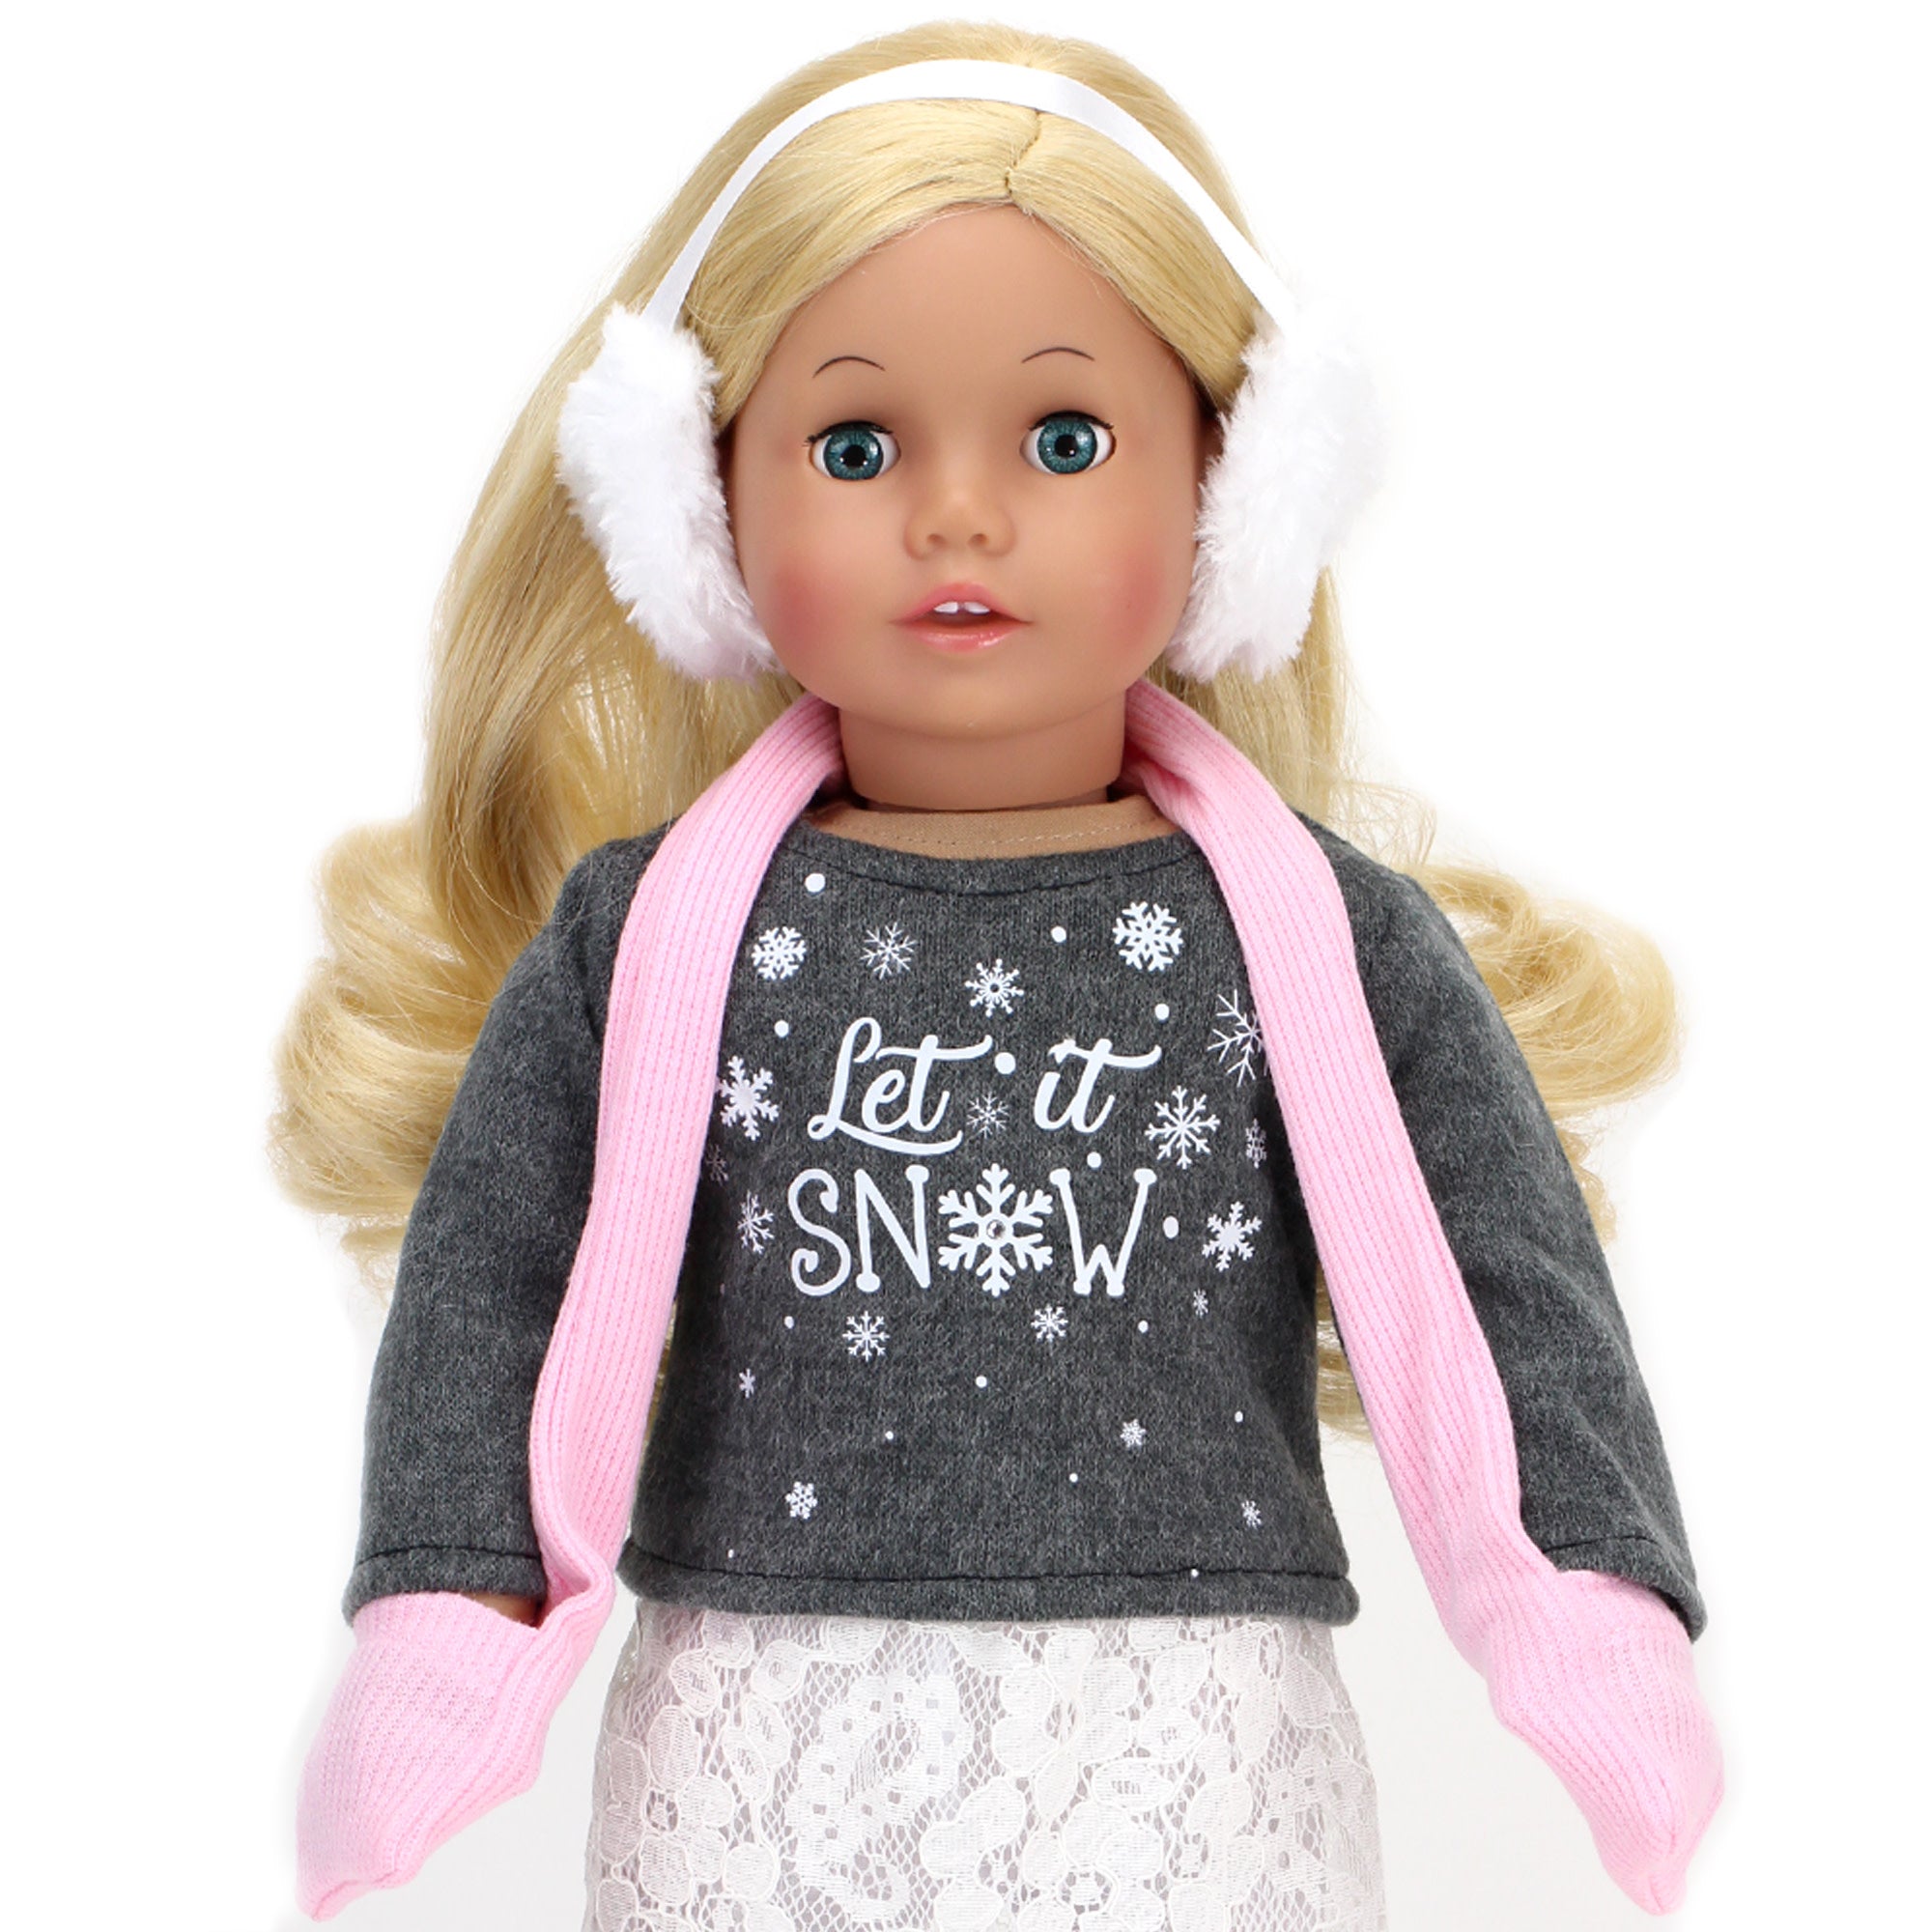 Sophia's 6 Piece 'Let it Snow' Sweater and Skirt Outfit Set for 18'' Dolls